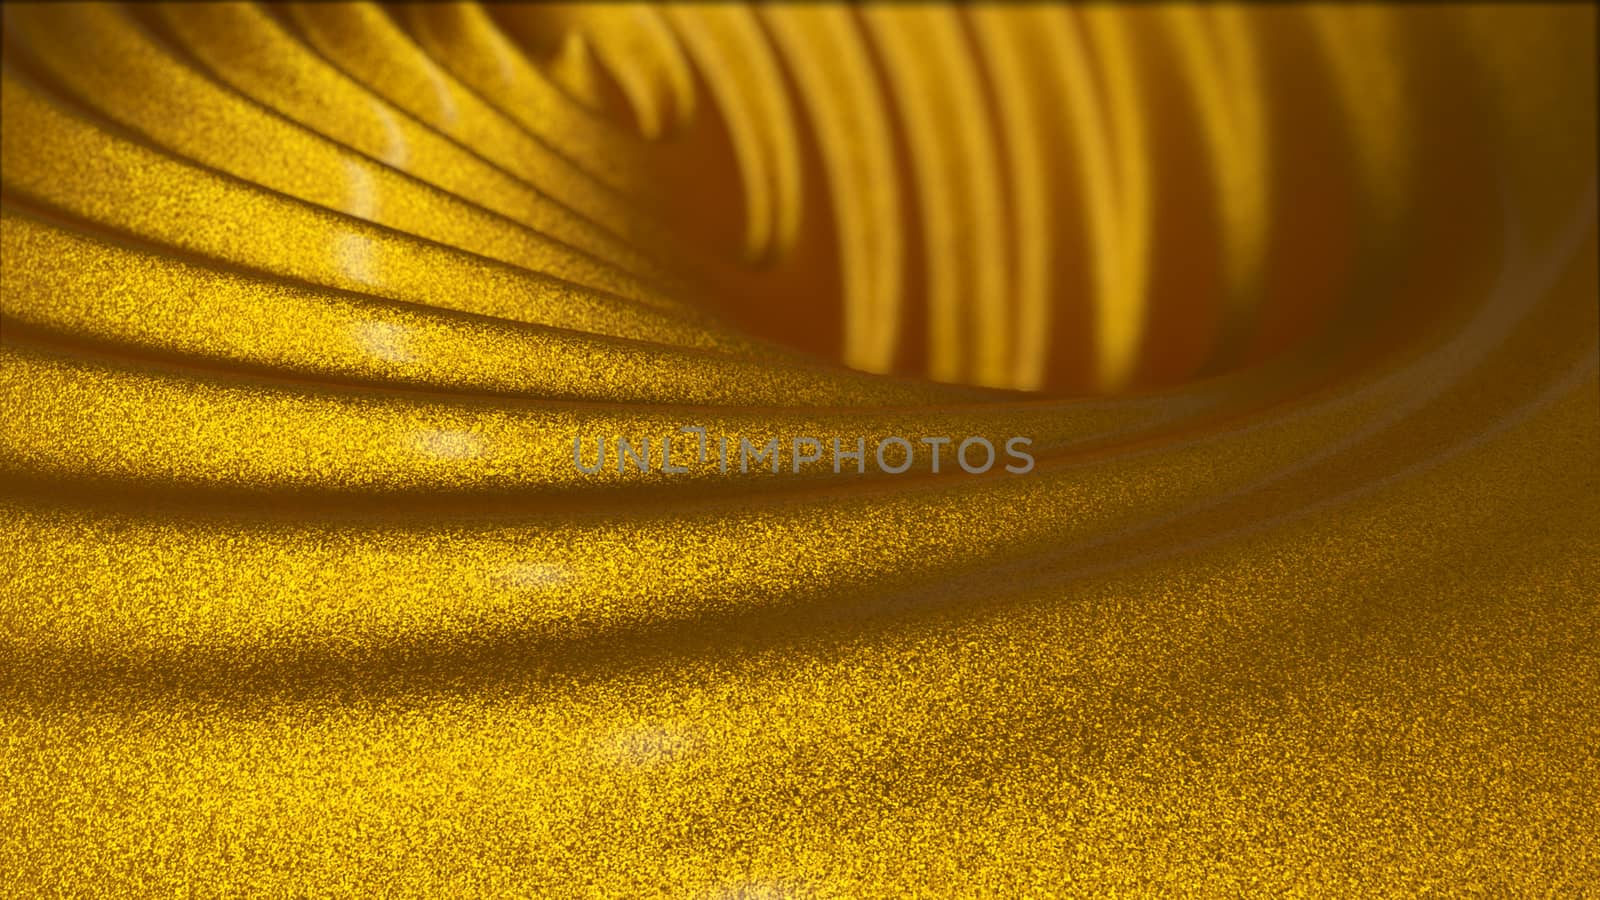 3d rendering of melted golden wavy substance with small flakes and light reflections on it.